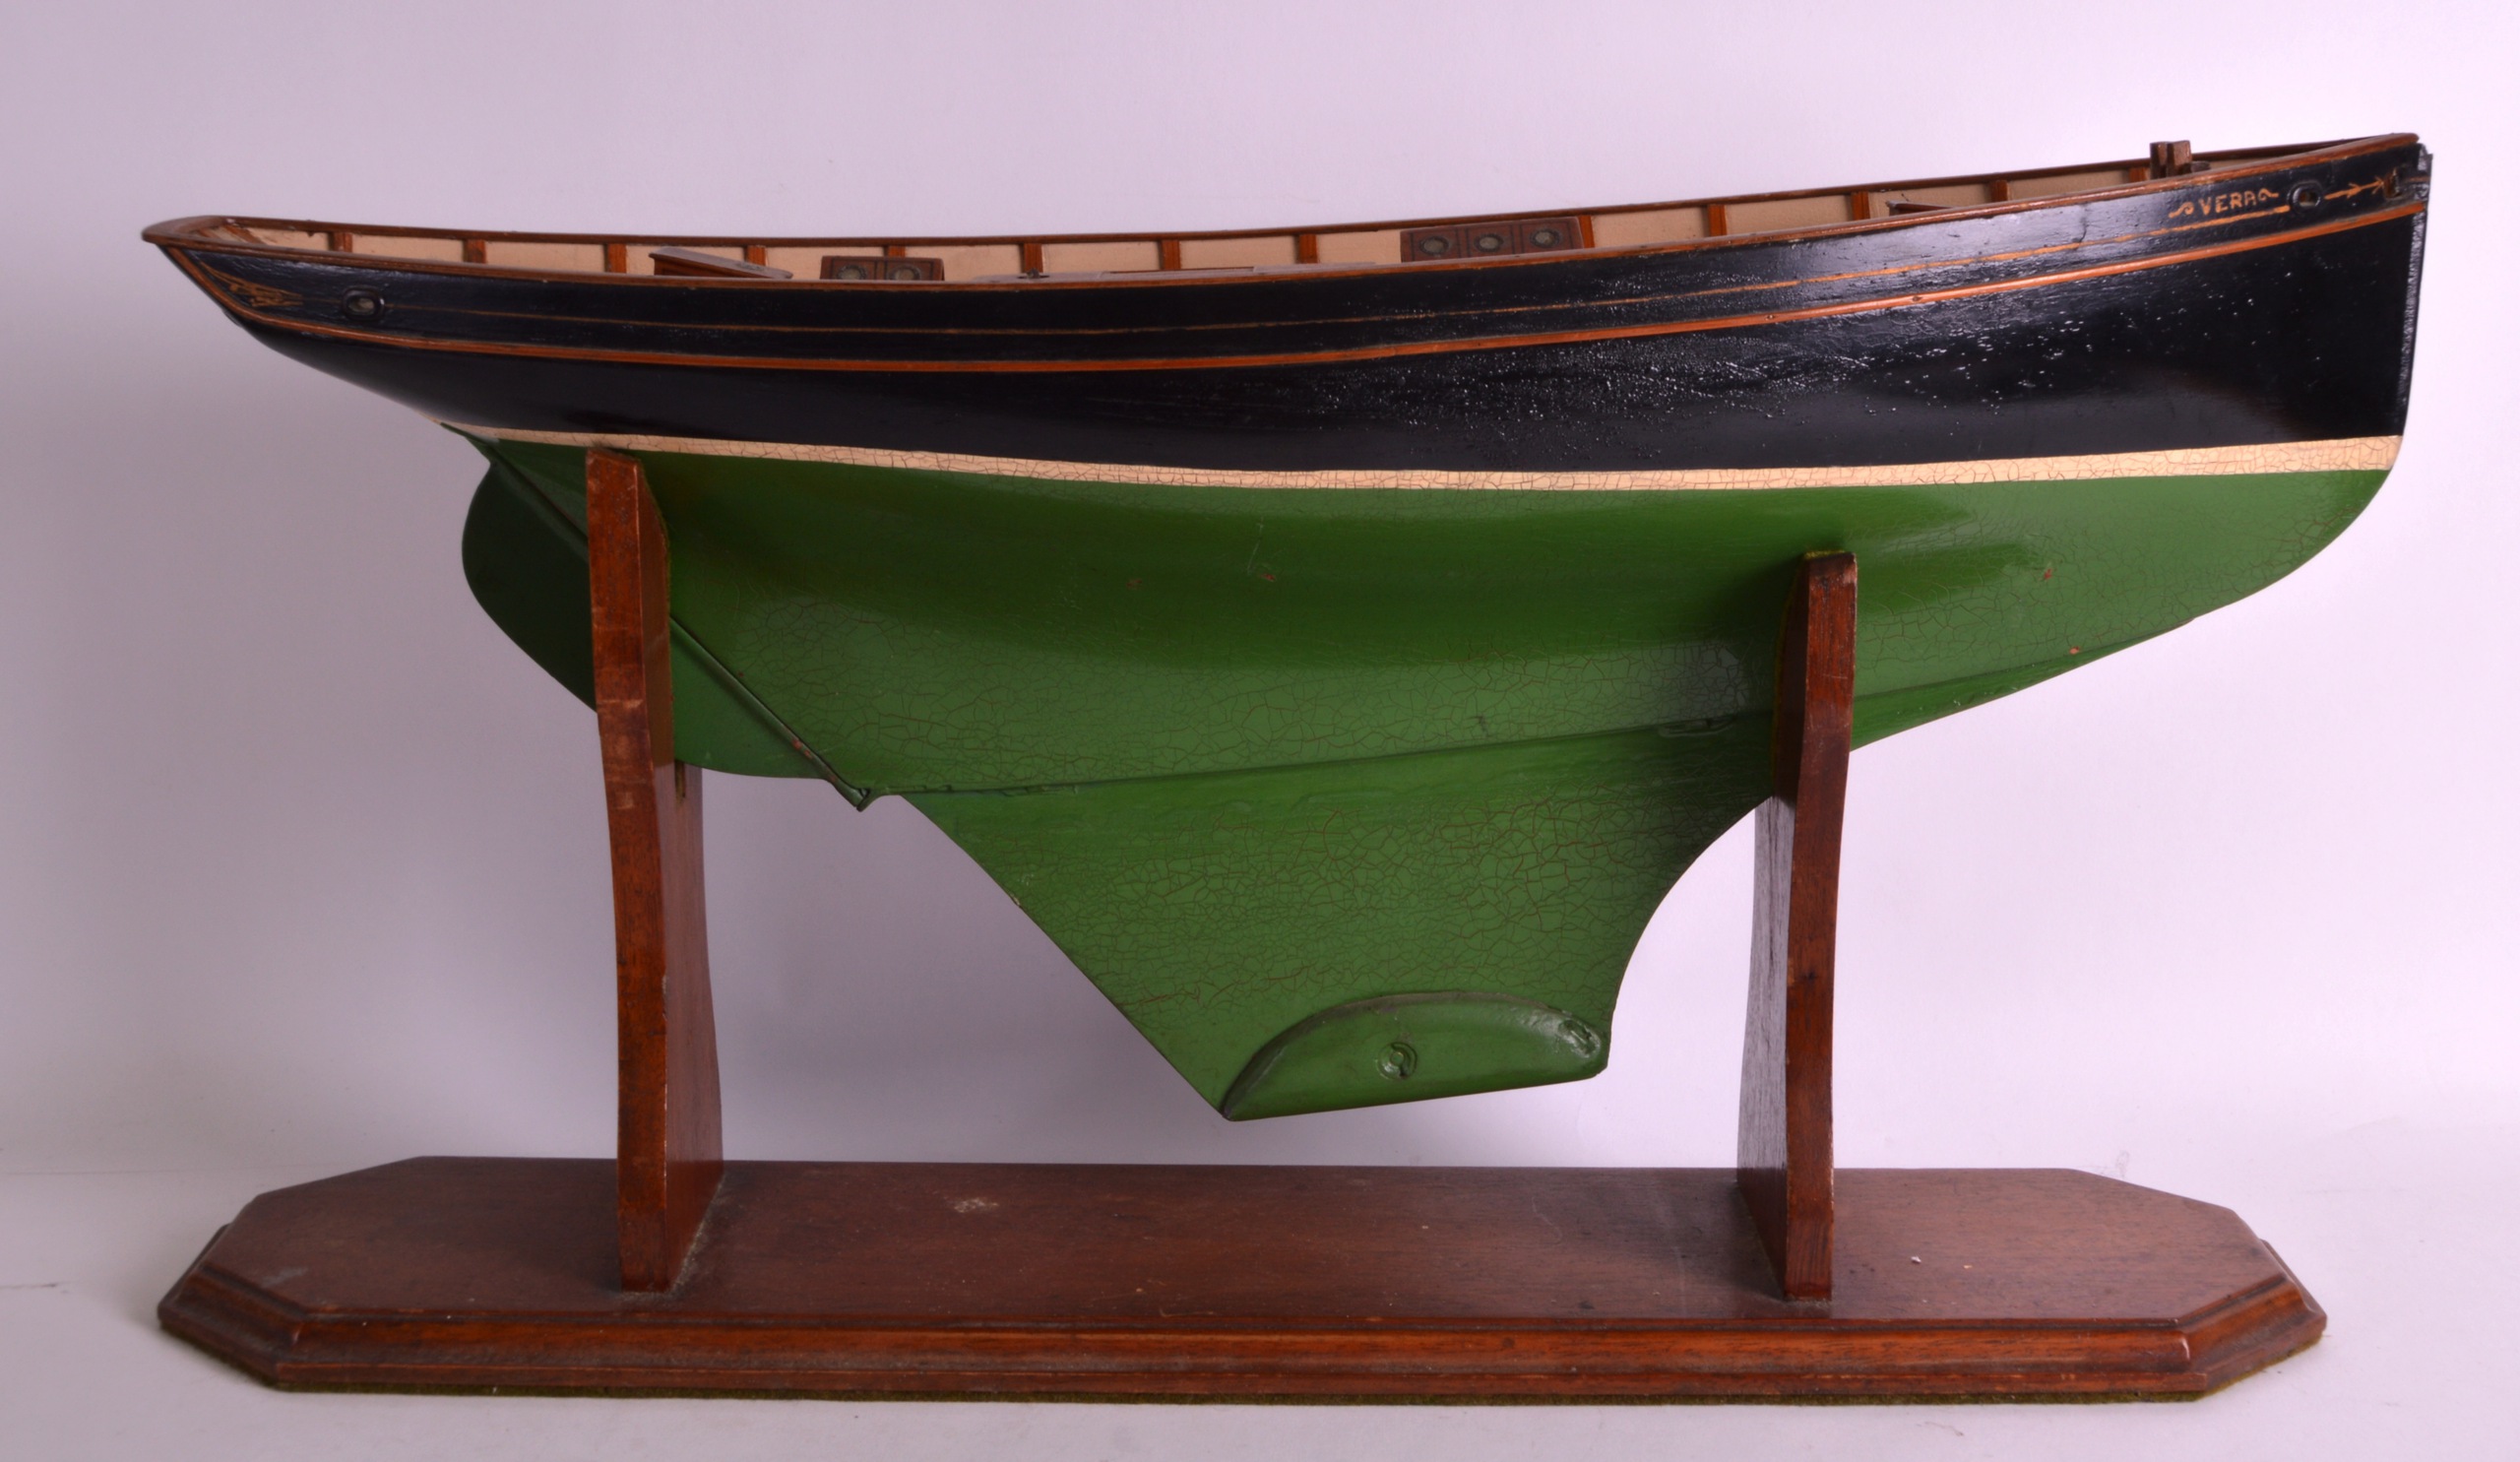 A LARGE EARLY 20TH CENTURY PAINTED AND LACQUERED WOOD BOAT named 'Vera' supported upon an oak